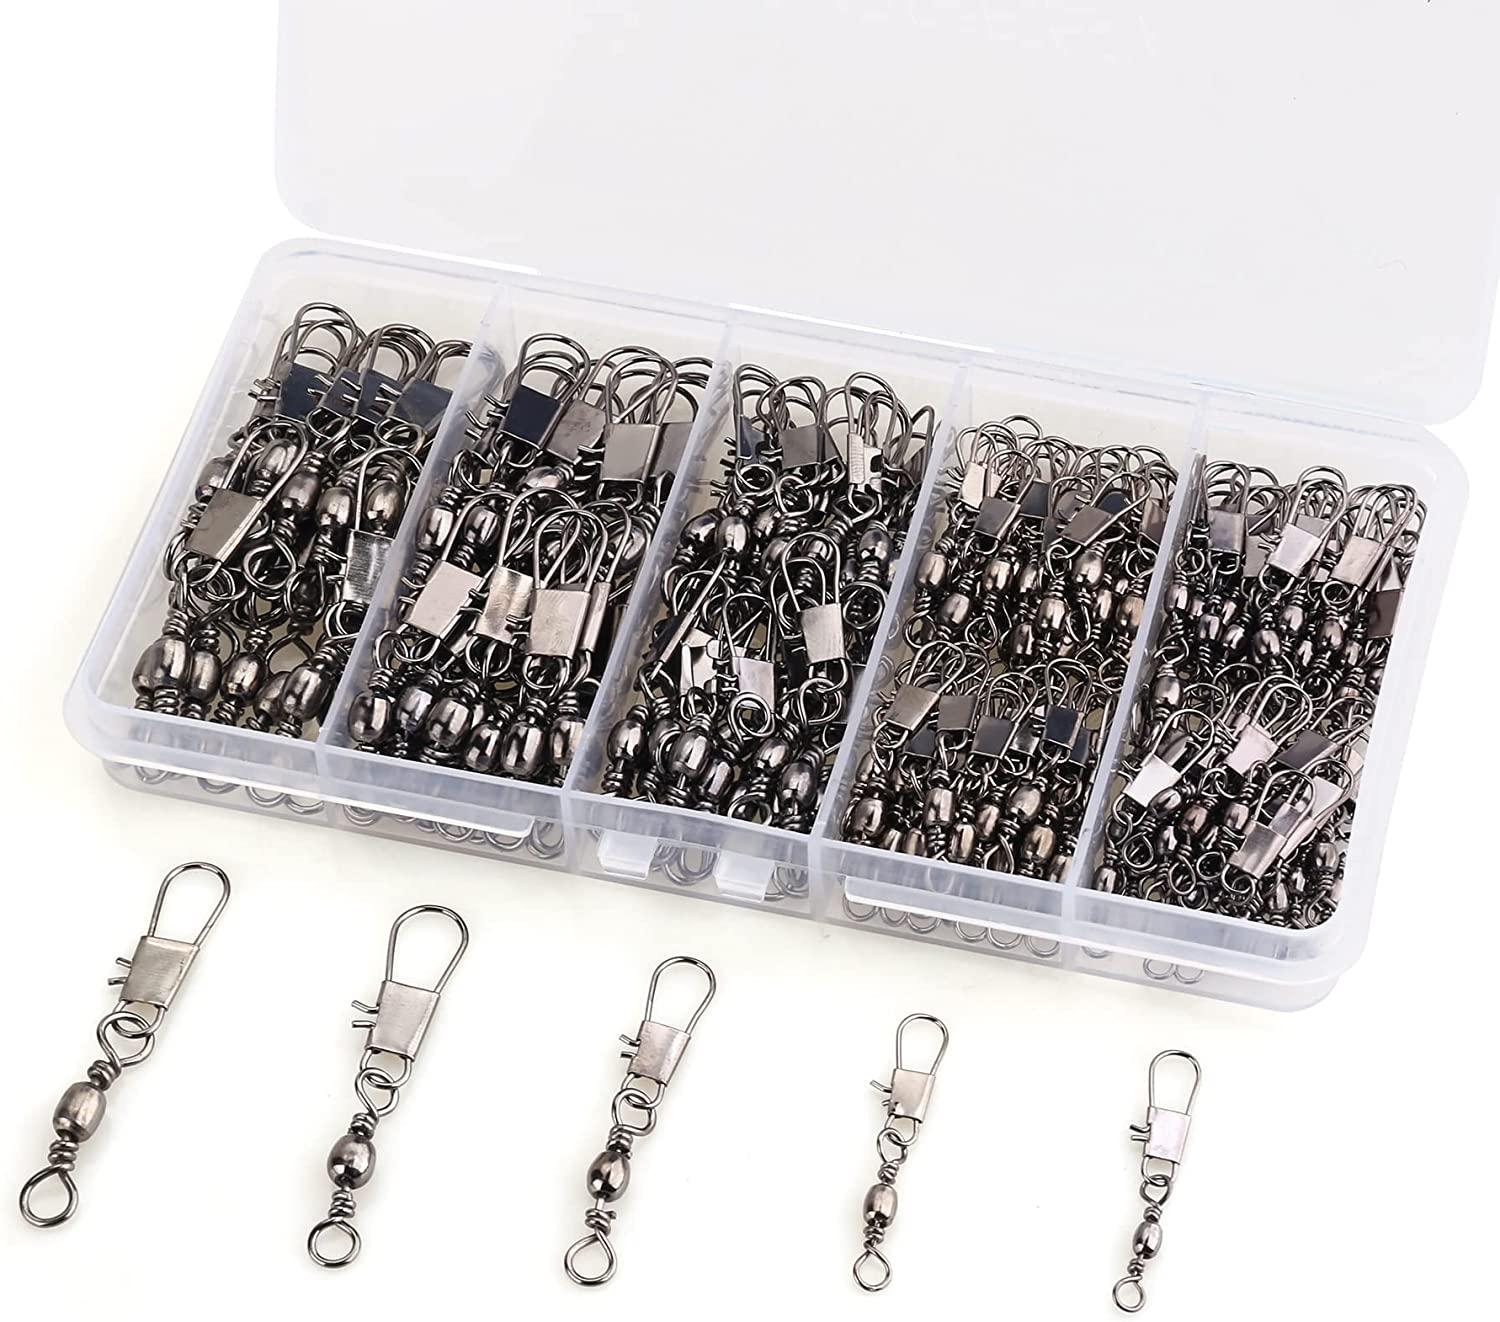 MOBOREST 200PCS Barrel Snap Swivel Fishing Accessories, Premium Fishing  Gear Equipment with Ball Bearing Swivels Snaps Connector for Quick Connect  Fishing Lures